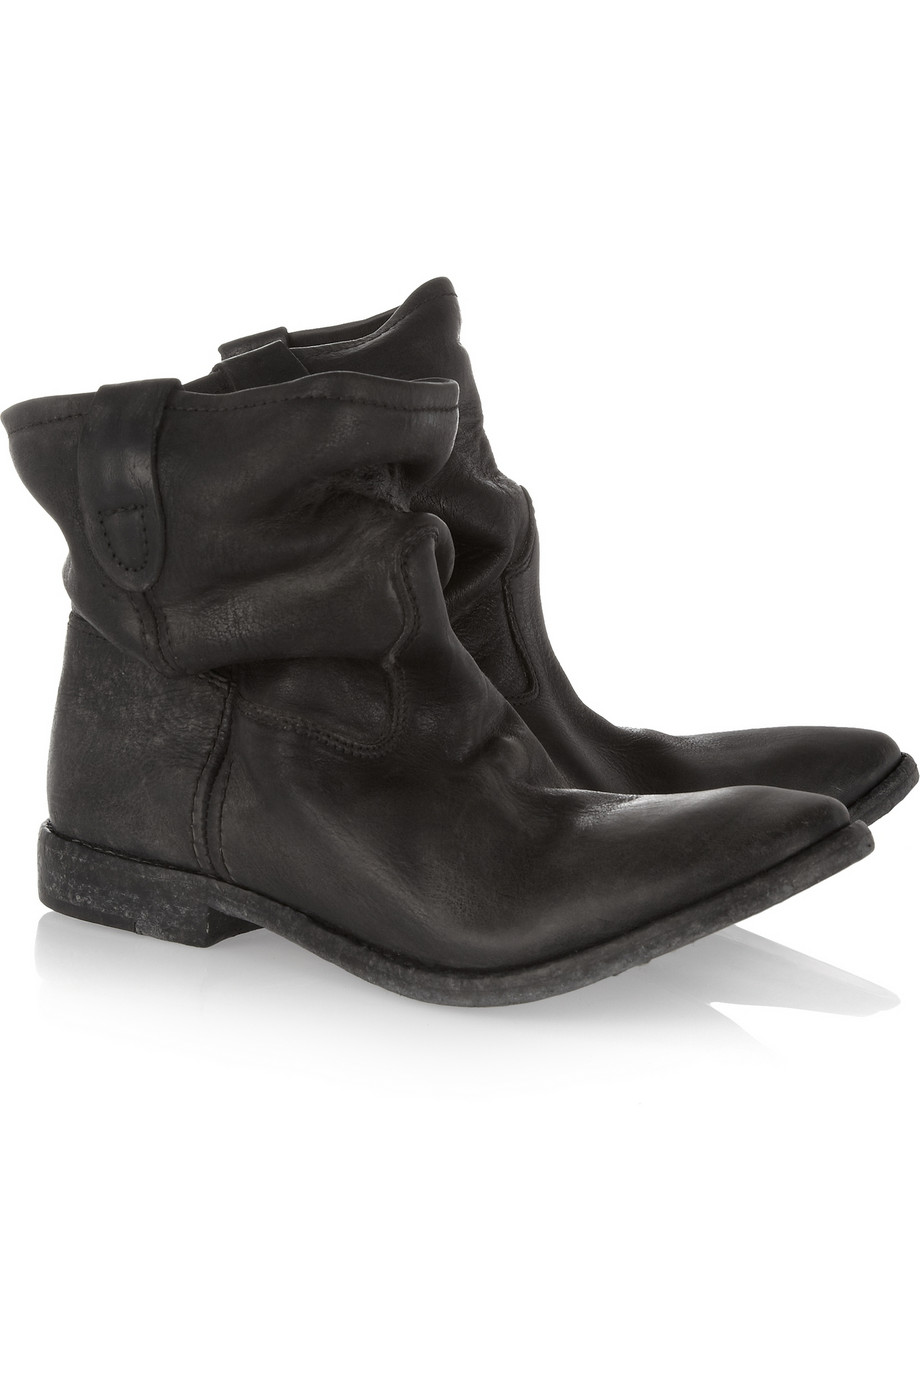 Isabel Marant Jenny Slouchy Leather Ankle Boots in Black - Lyst